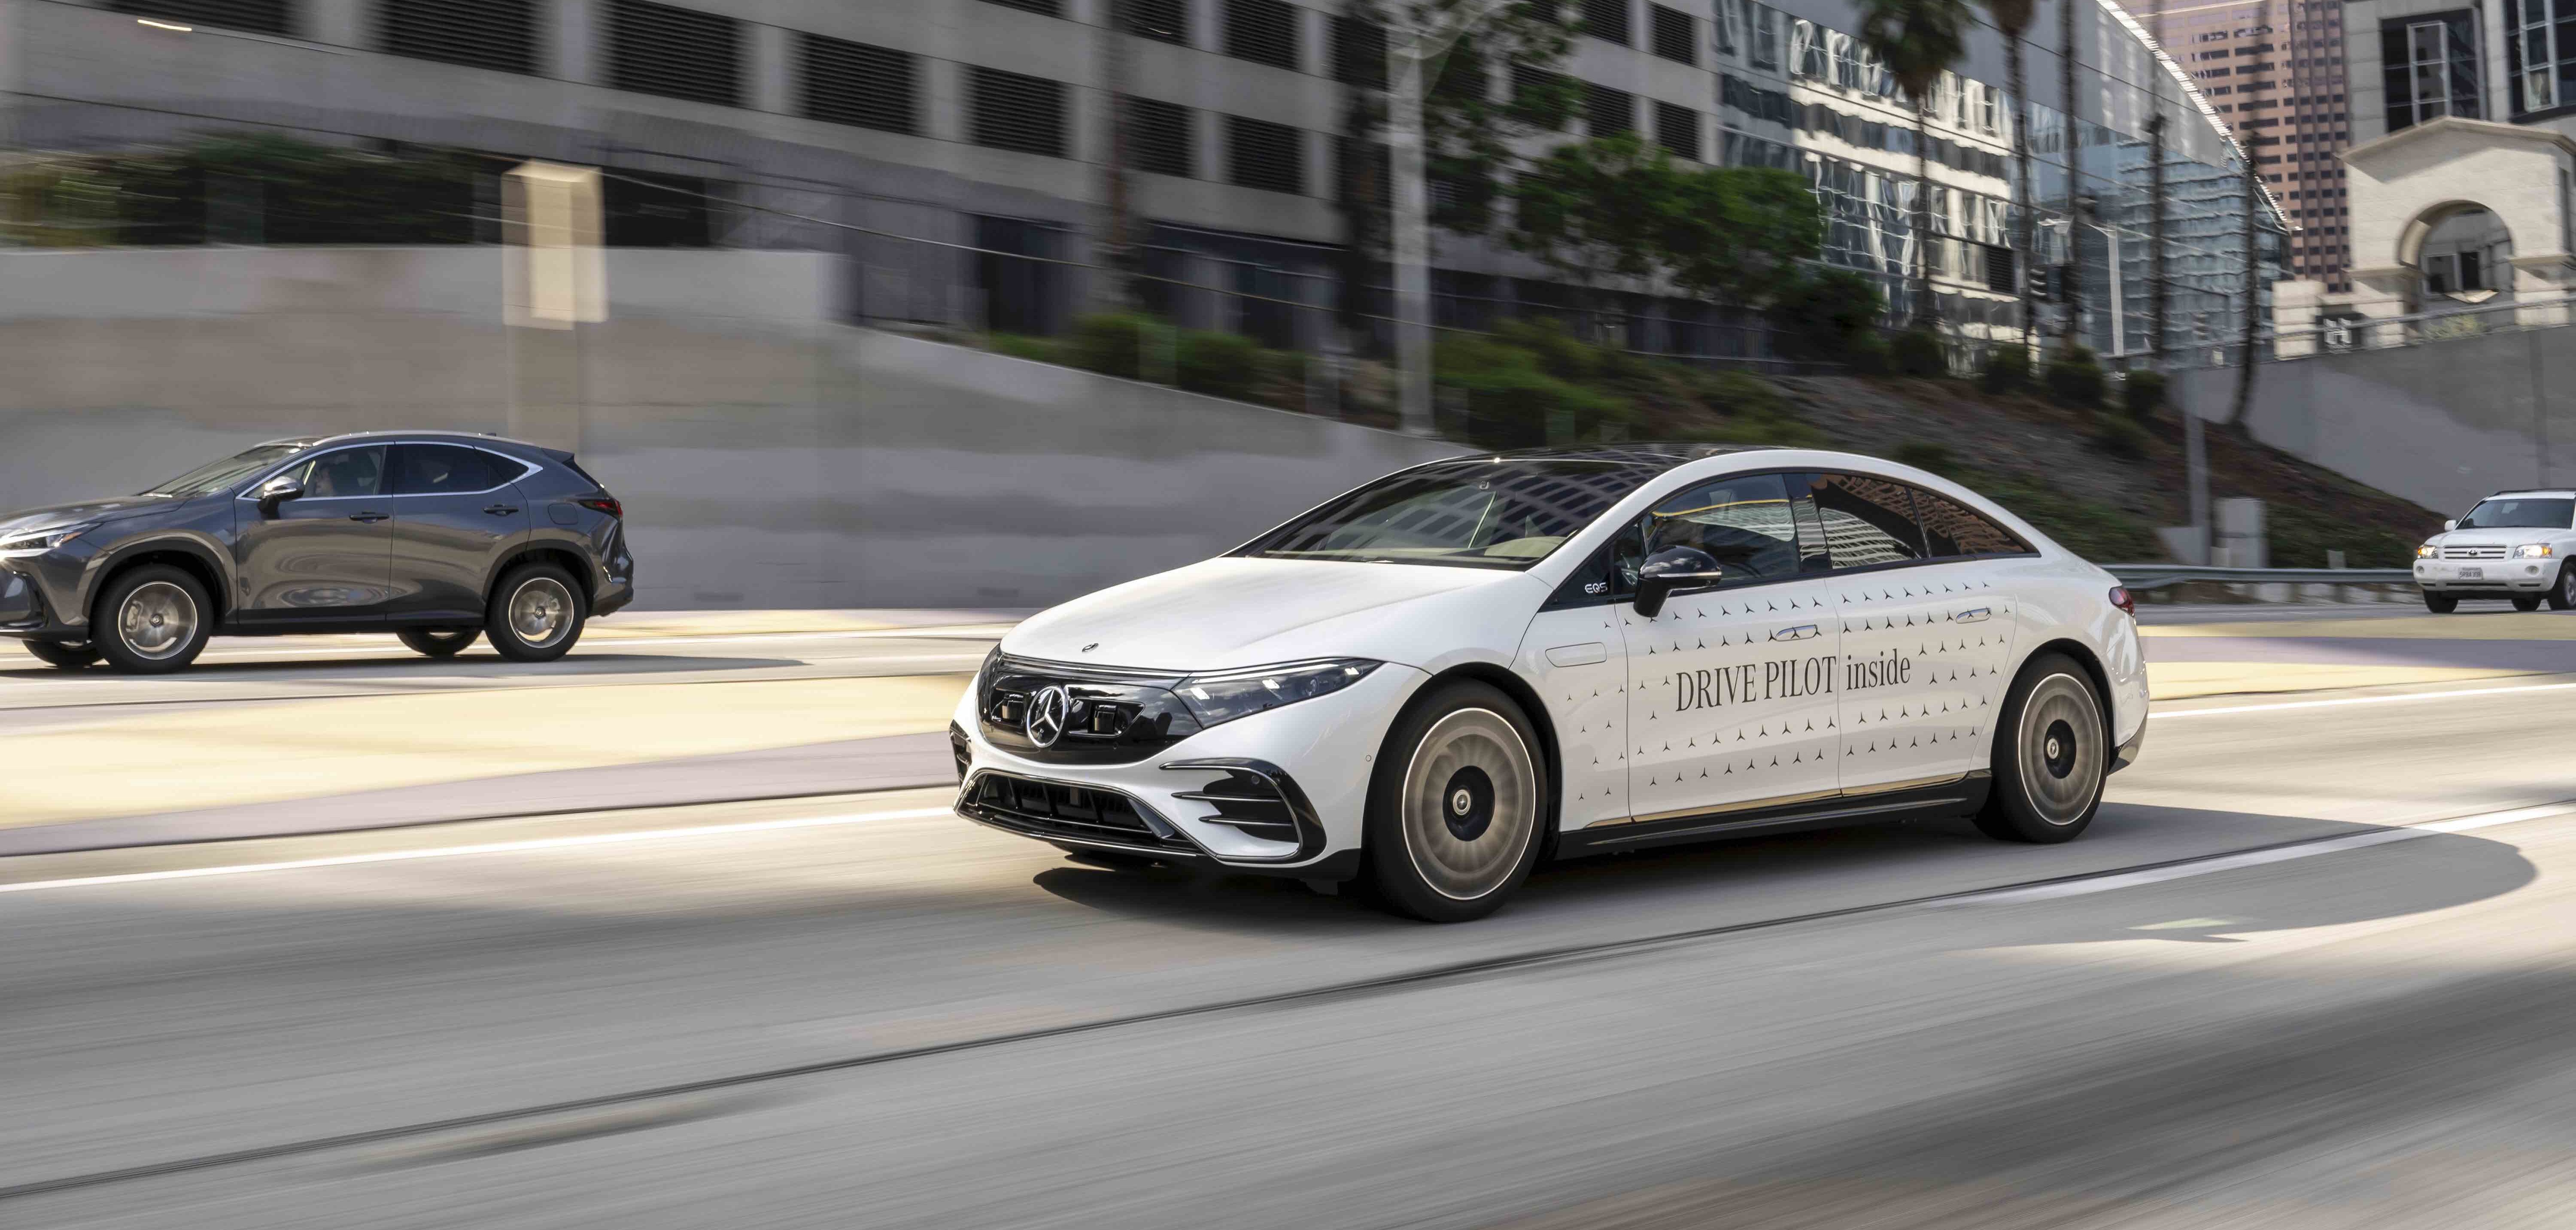 Mercedez-Benz to deploy advanced automated driving system in